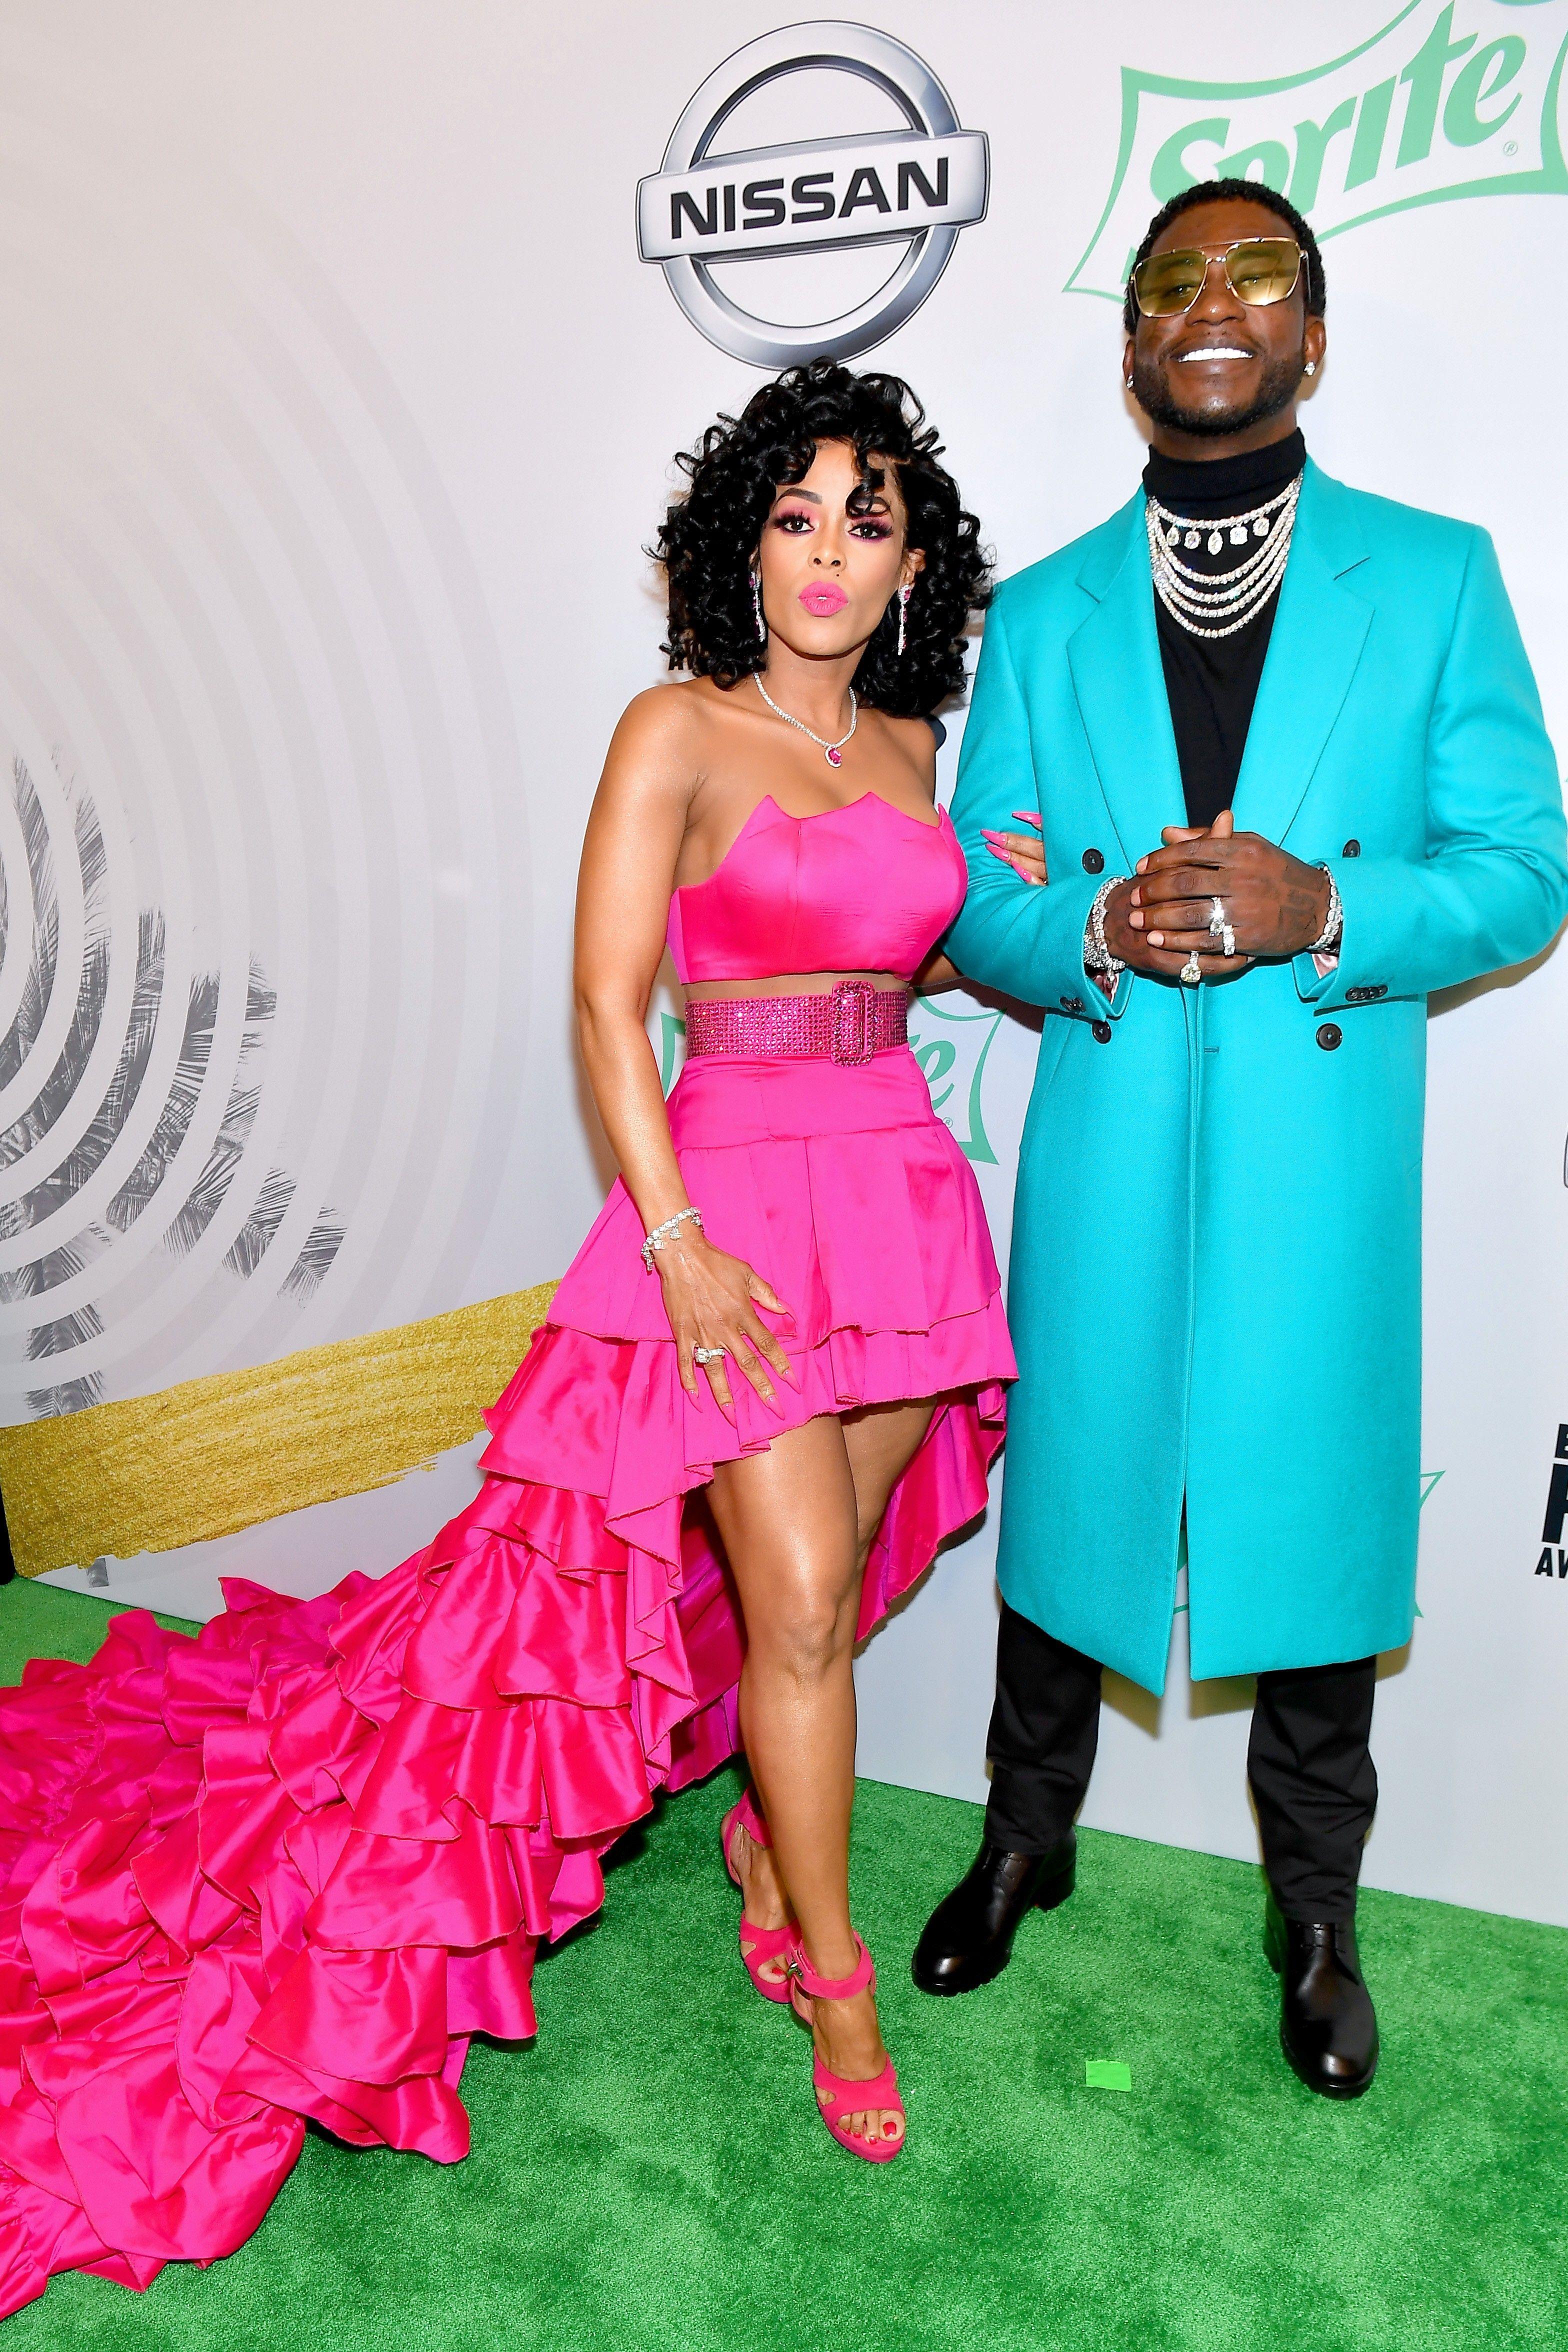 Celebrities Hit The Carpet For The 2018 BET Hip Hop Awards